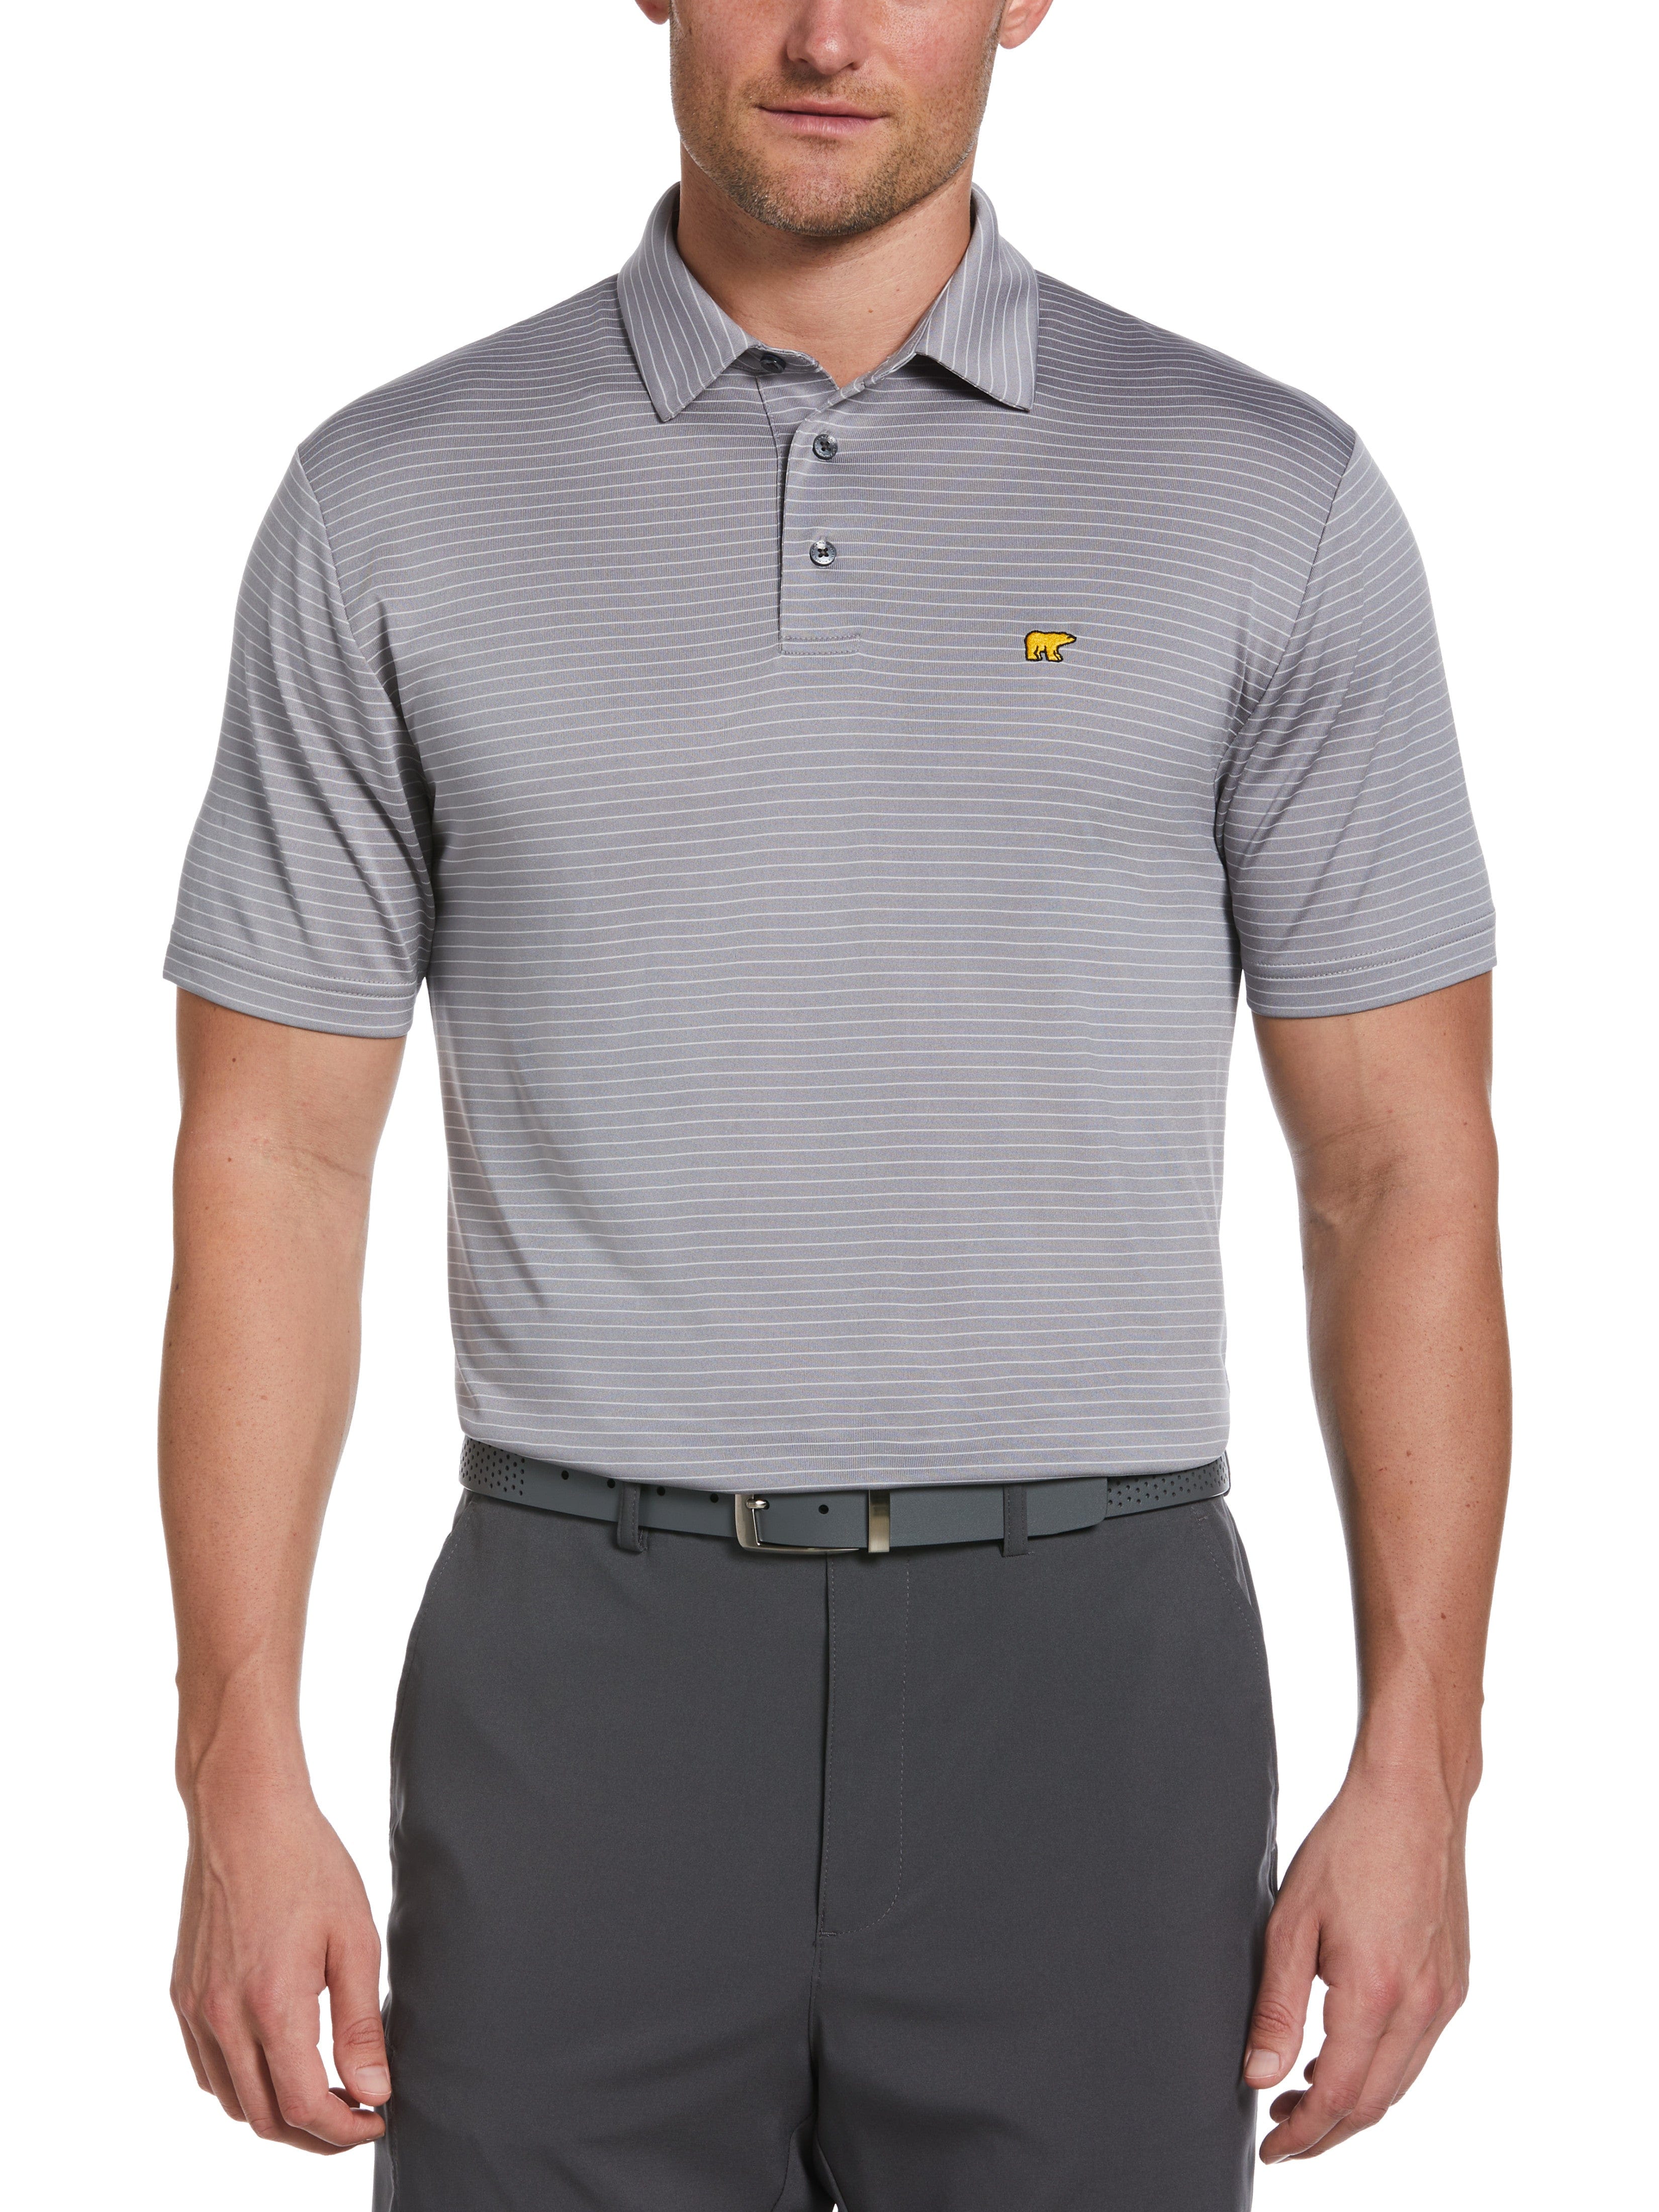 Jack Nicklaus Mens Two Color Stripe Golf Polo Shirt, Size Small, Tradewinds Gray, 100% Polyester | Golf Apparel Shop